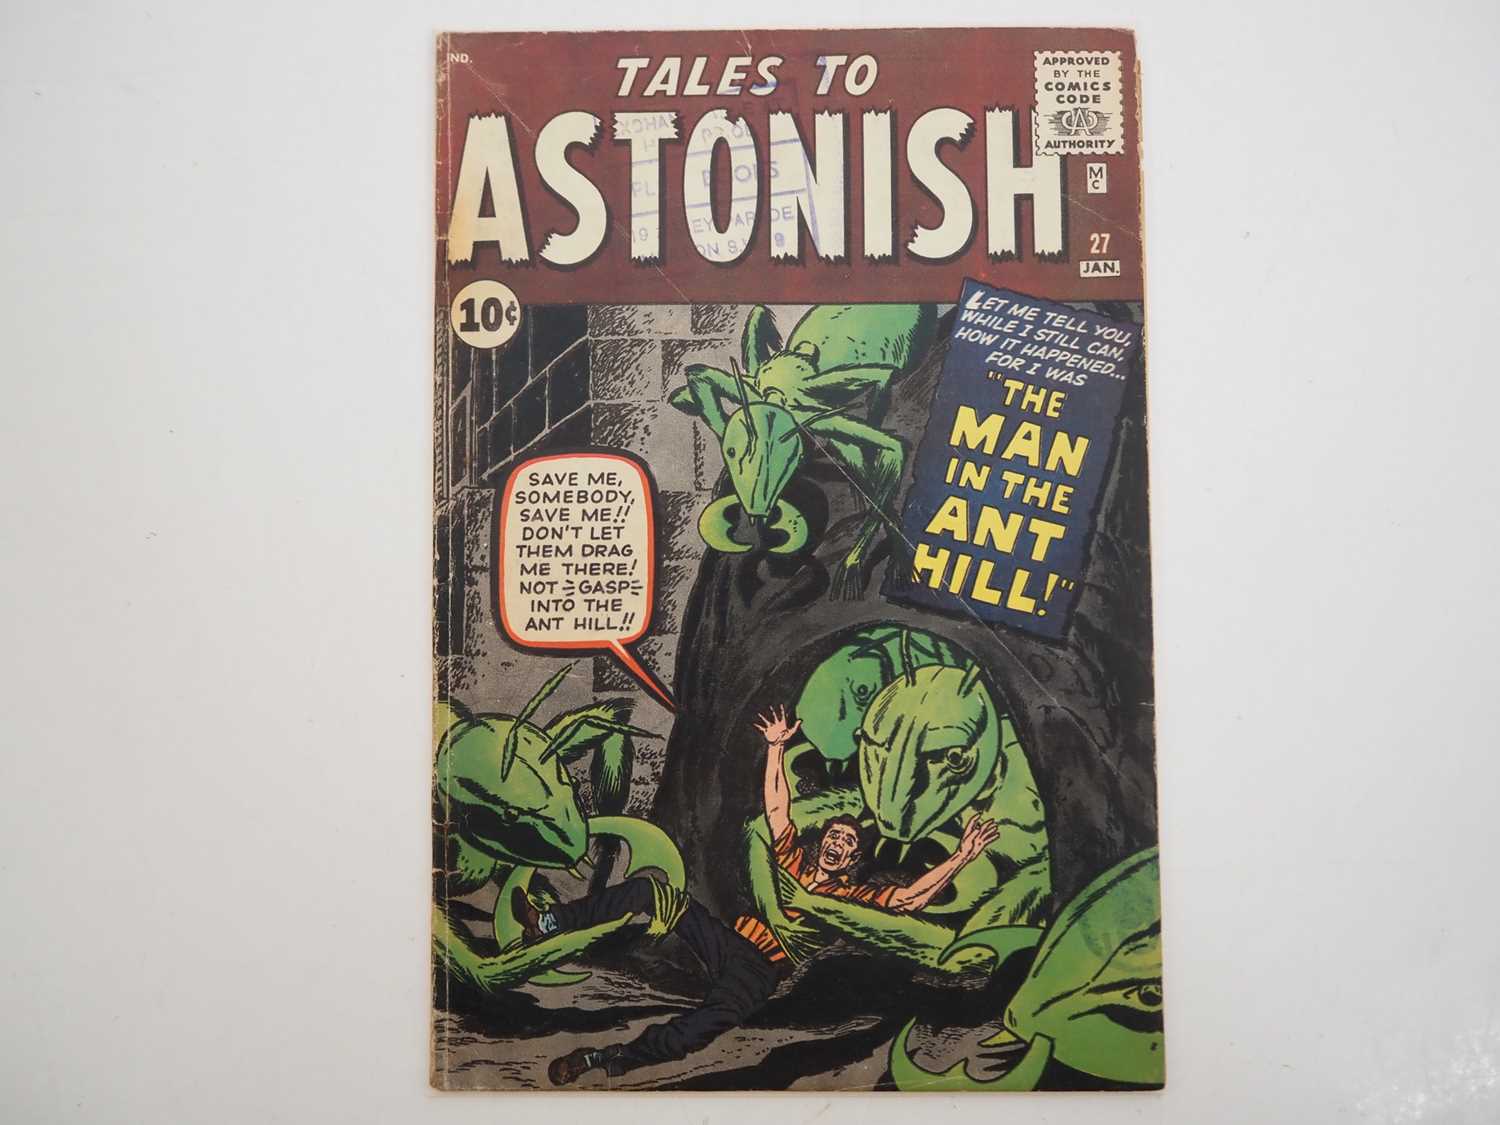 TALES TO ASTONISH #27 (1962 - MARVEL) - First appearance of Ant-Man (Henry Pym) + Currently #12 on